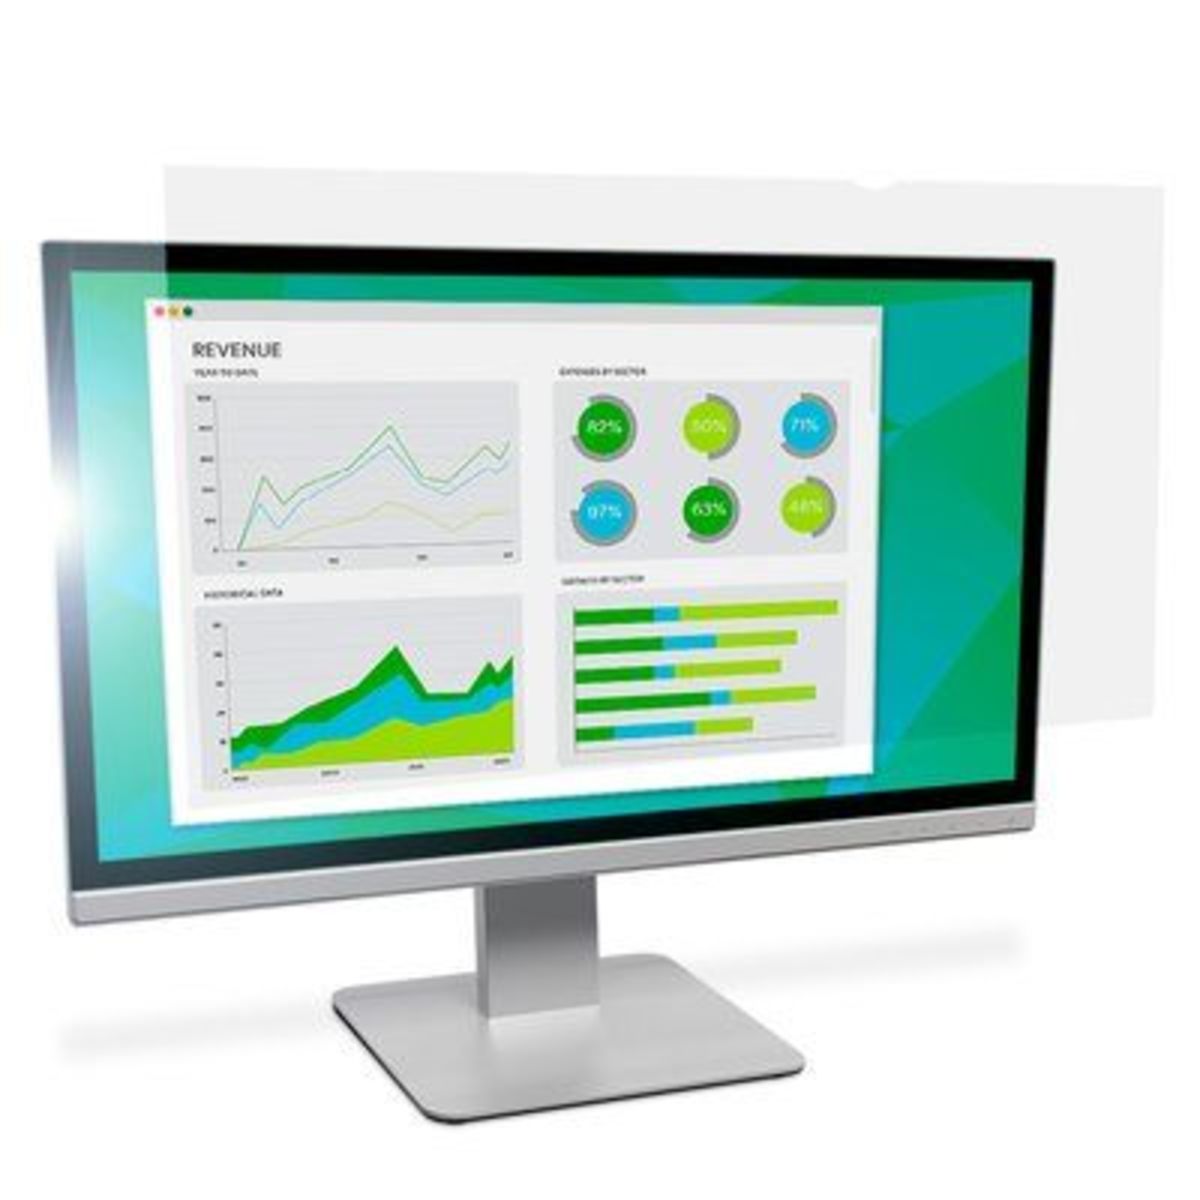 Anti-Glare Filter for 27" Widescreen Monitor (16:9) AG270W9B